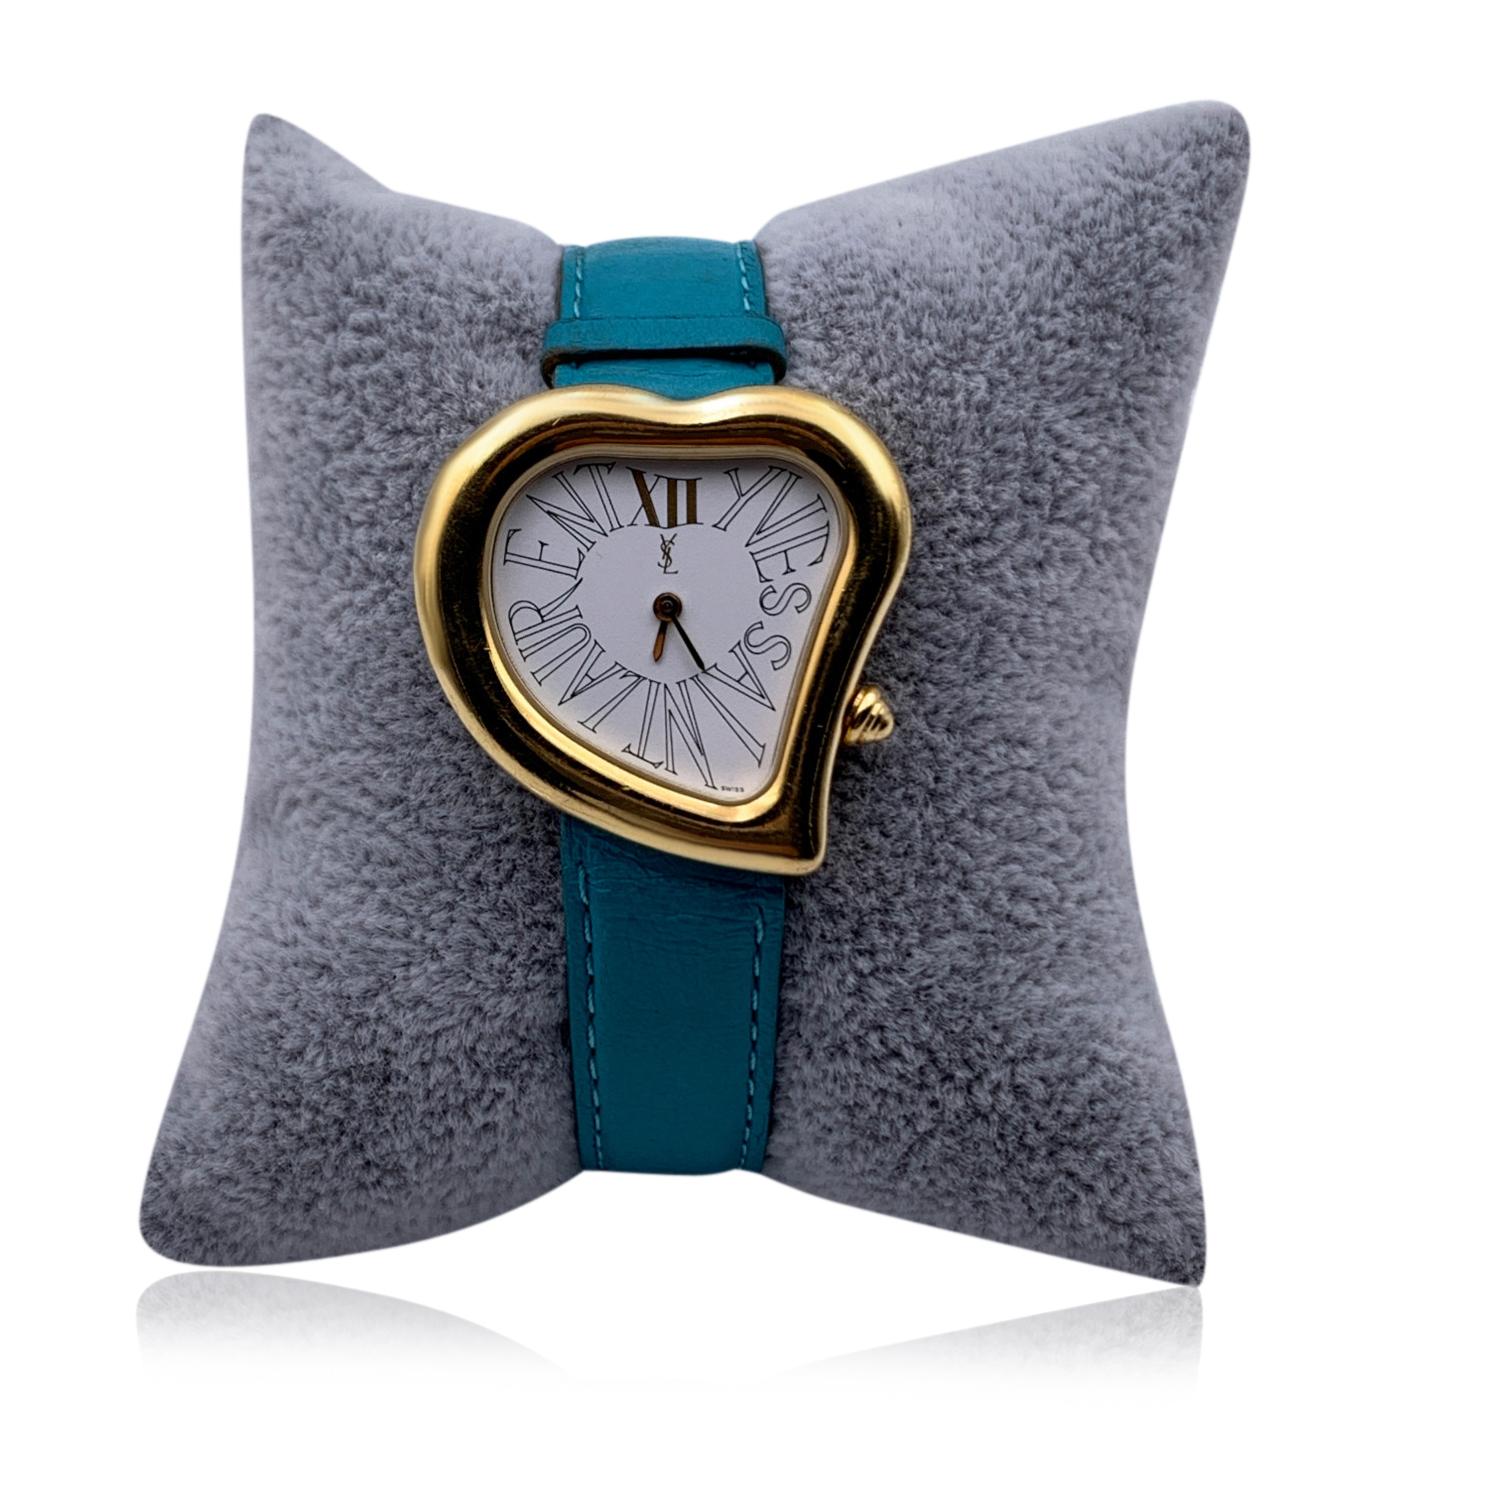 Vintage Yves Saint Laurent heart-shaped wrist watch. Model 05F. Gold metal and stainless steel case (30 mm). White dial. Roman numbers. Turquoise leather strap with 8 holes adjustament. Not water resistant.Total length: 8 inches - 20.3 cm. Max